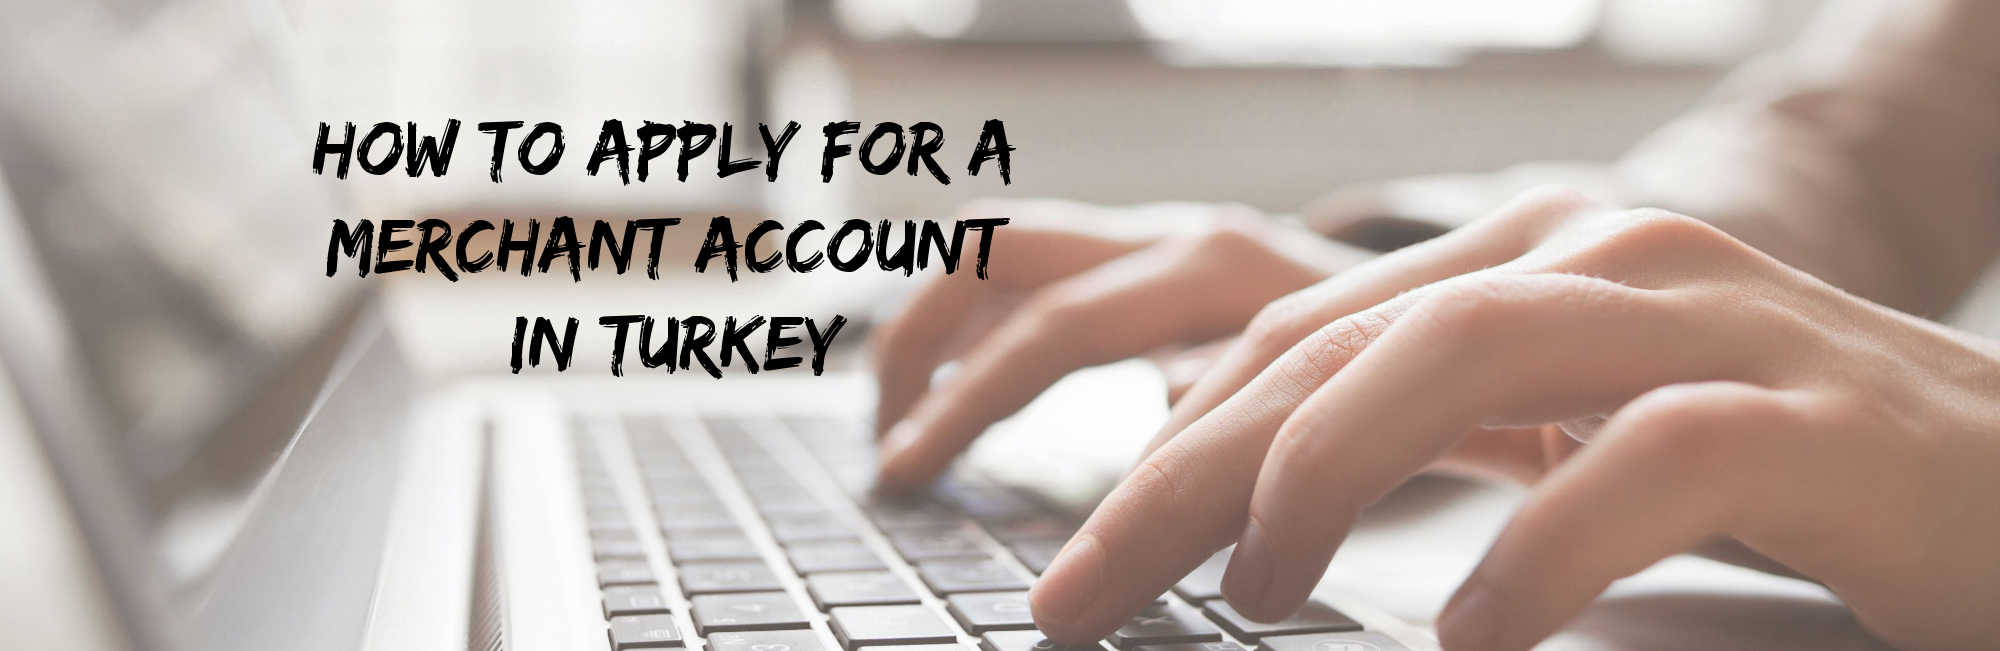 image of how to apply for a merchant account in turkey